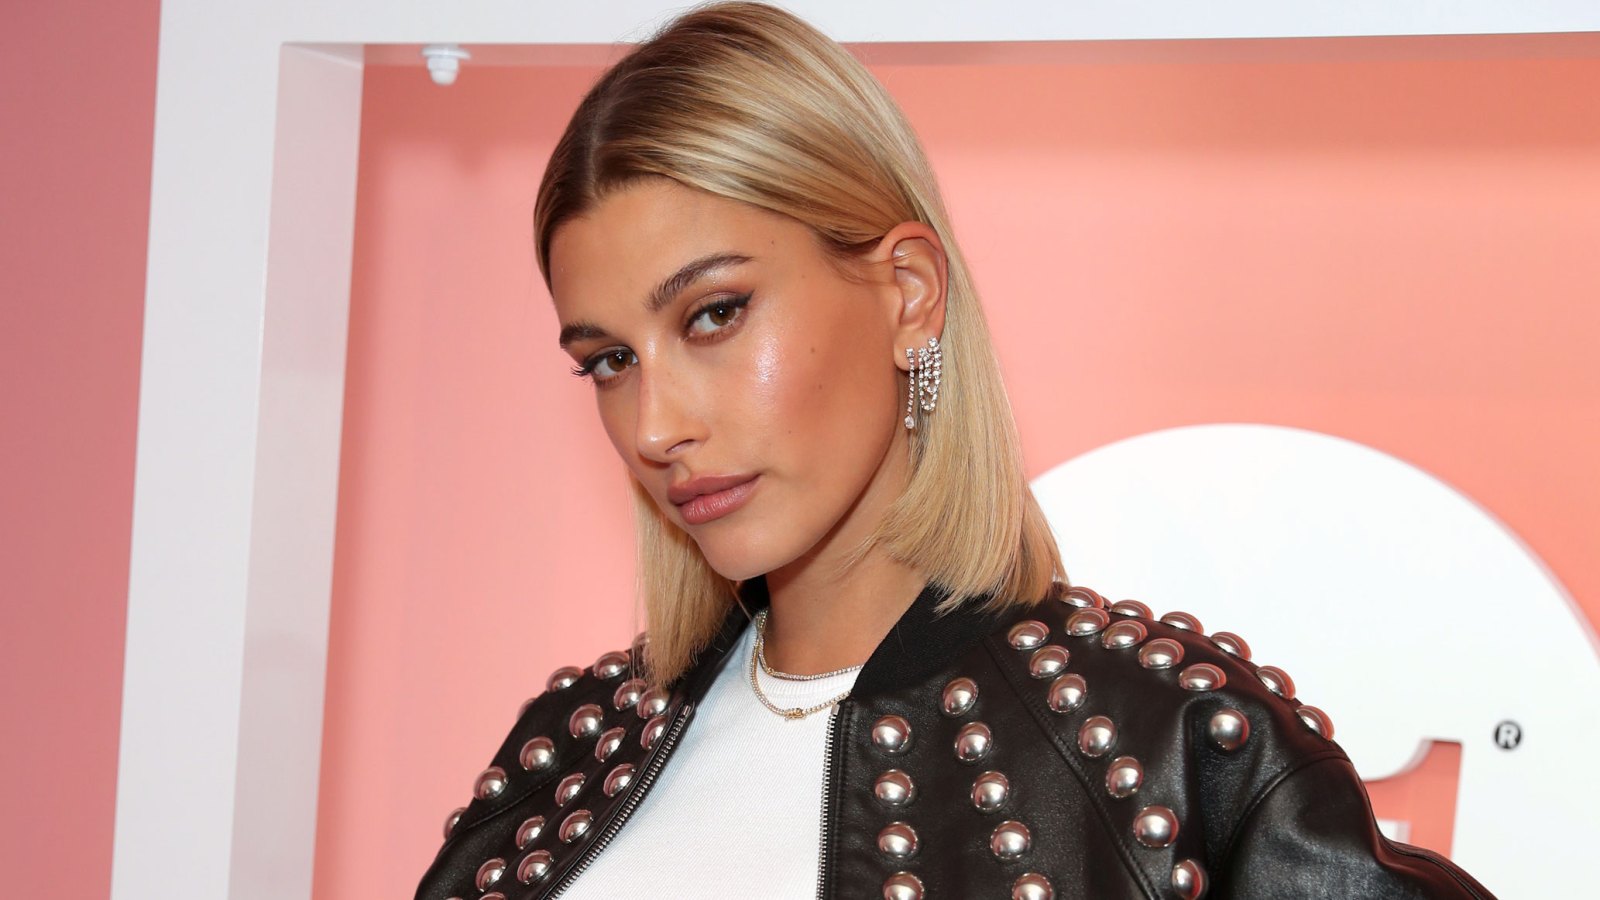 Hailey Baldwin Claps Back After Trolls Call Her a 'Fake Christian' For Celebrating Halloween